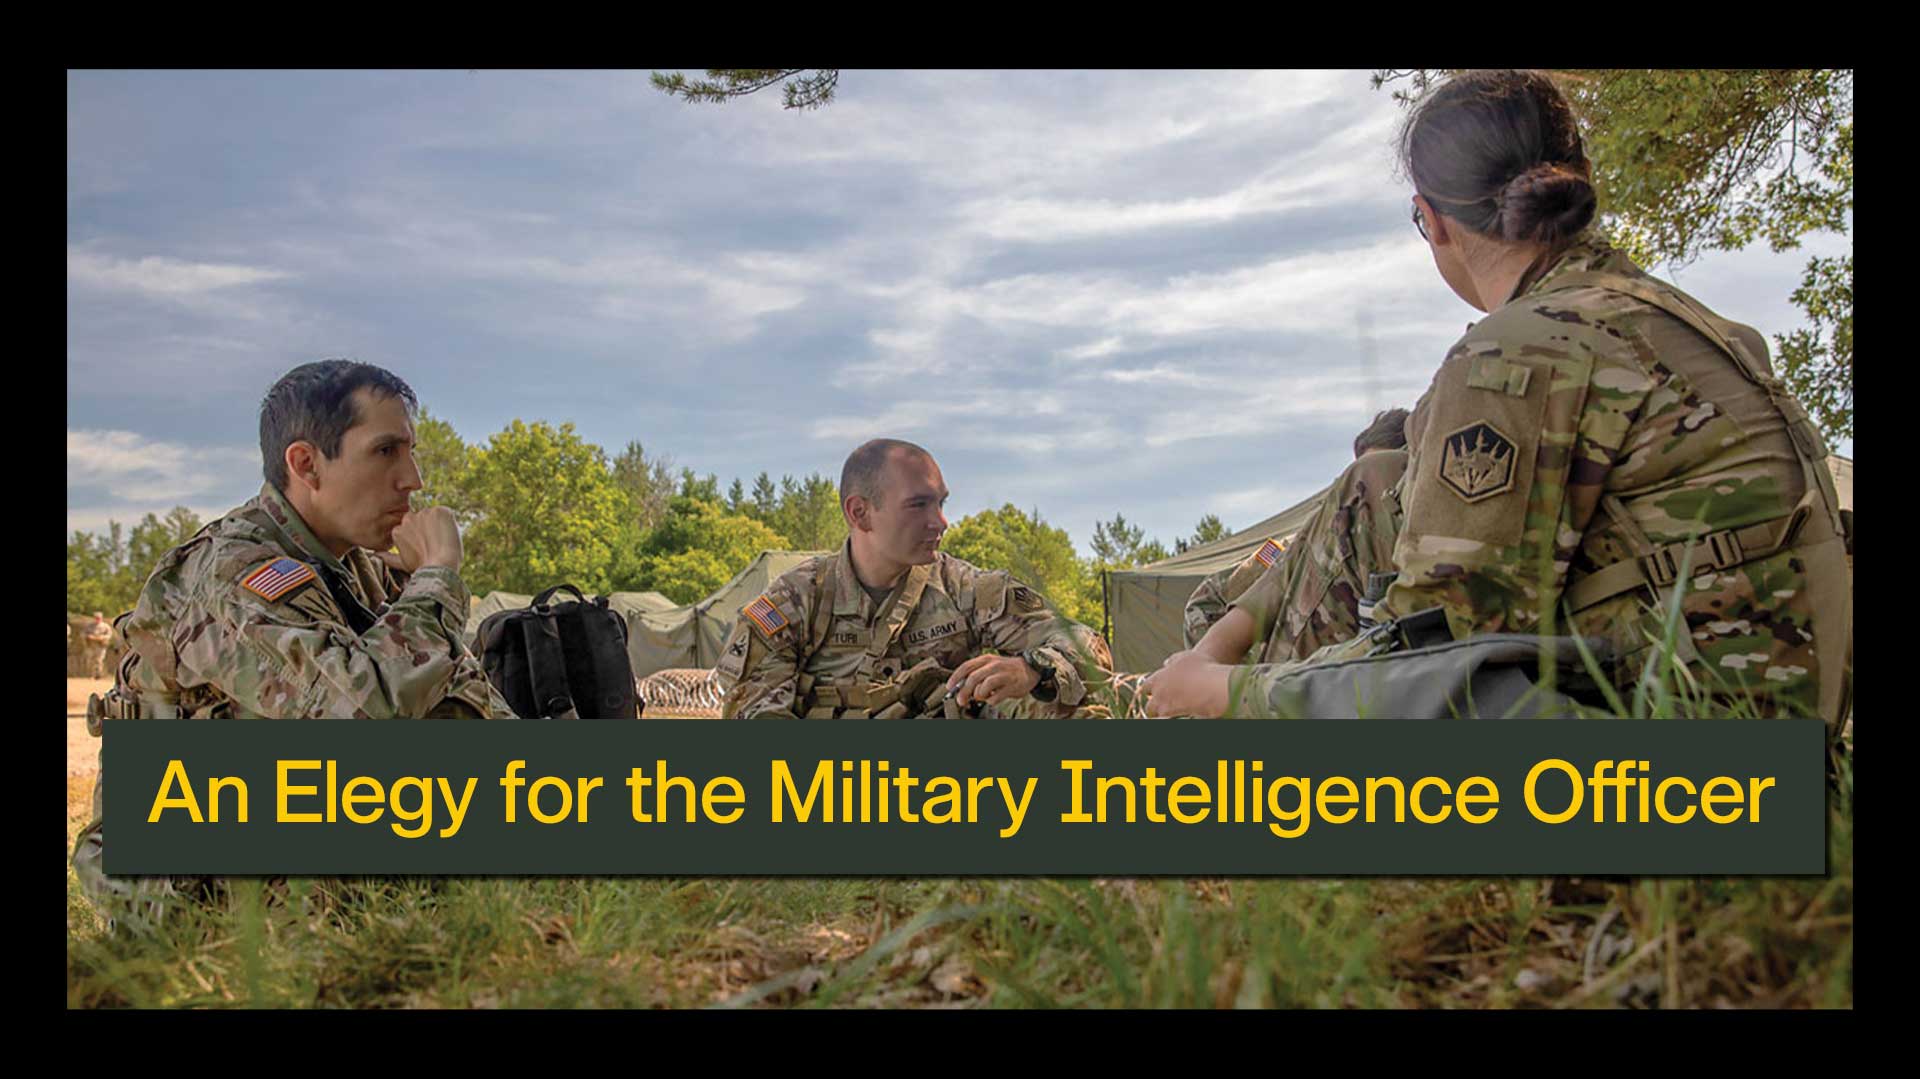 An Elegy for the Military Intelligence Officer